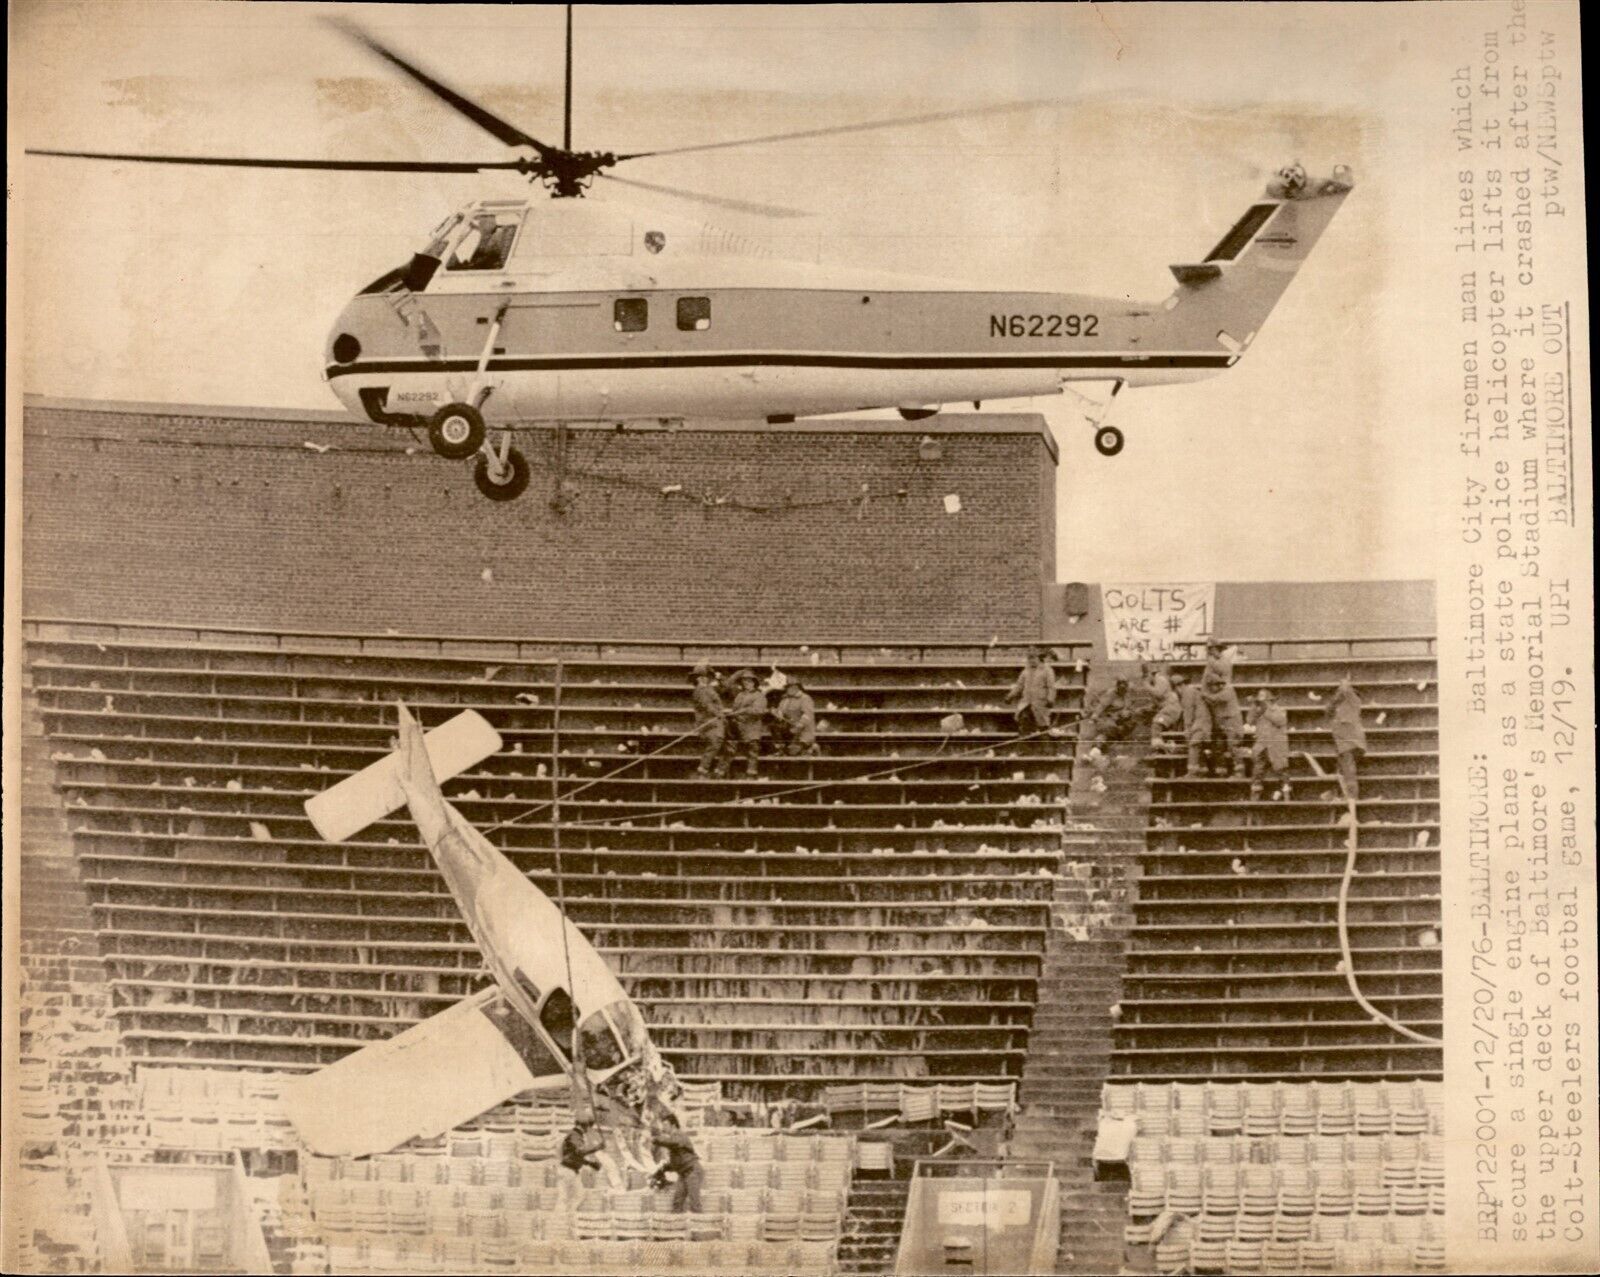 LD278 \'76 Wire Photo FIREMEN HELICOPTER REMOVES PLANE WRECKAGE BALTIMORE STADIUM